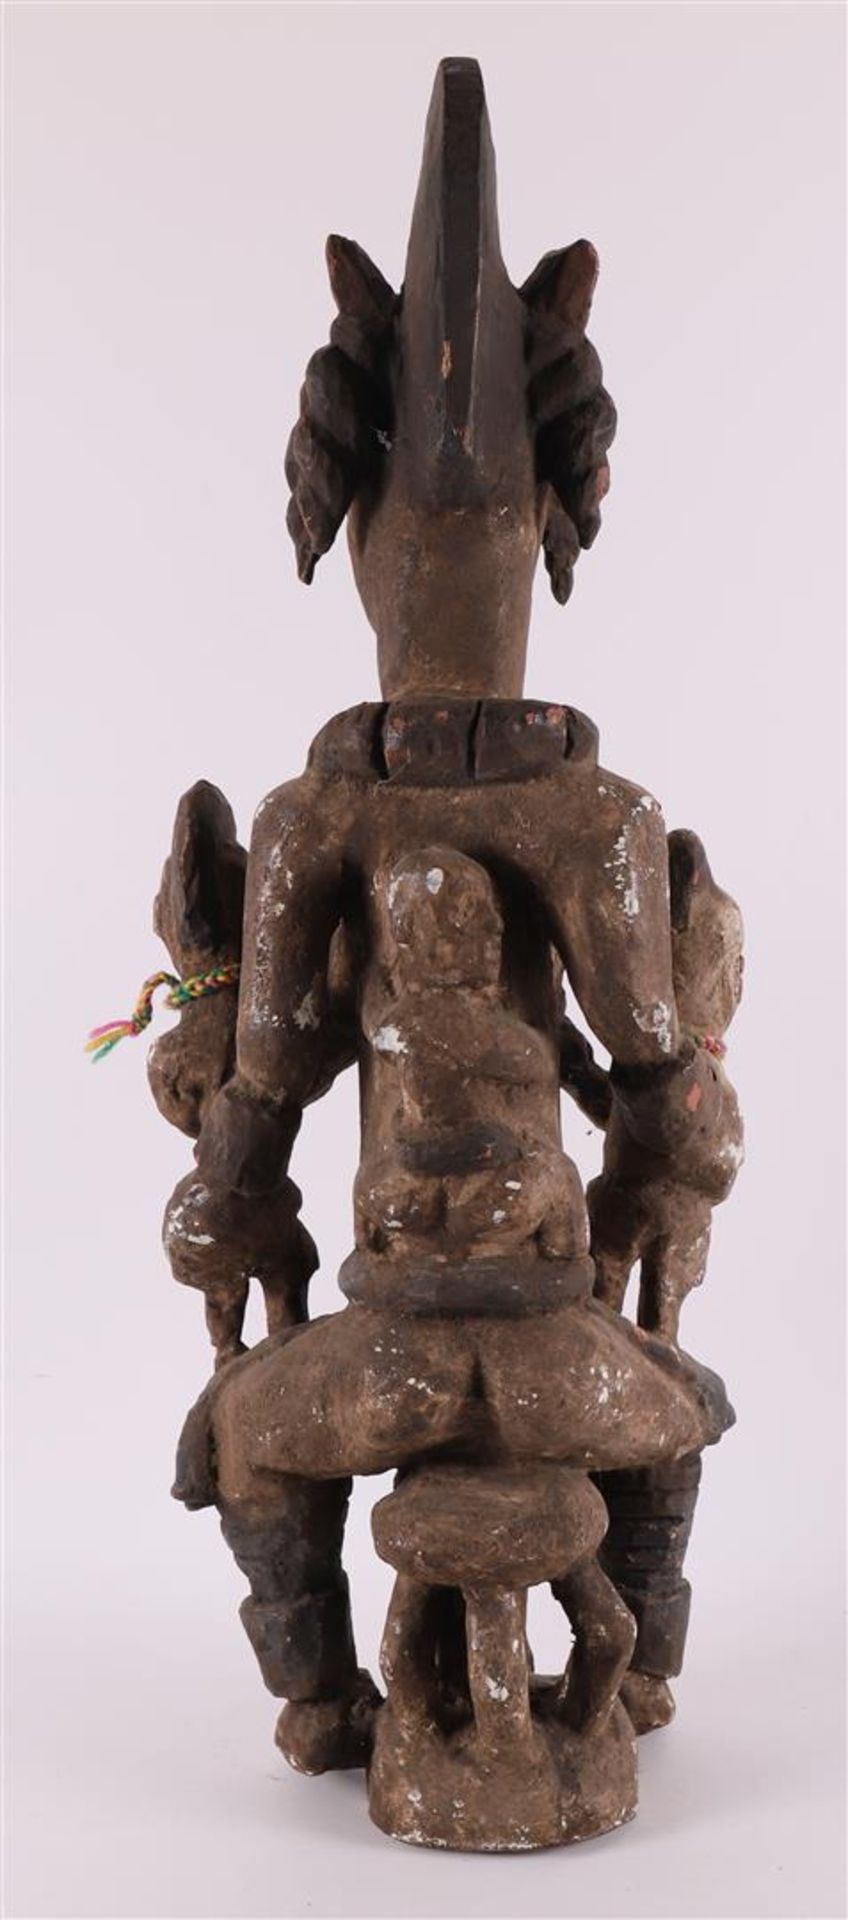 Ethnographic/tribal. A wooden fertility statue, Africa, Yoruba tribe - Image 3 of 4